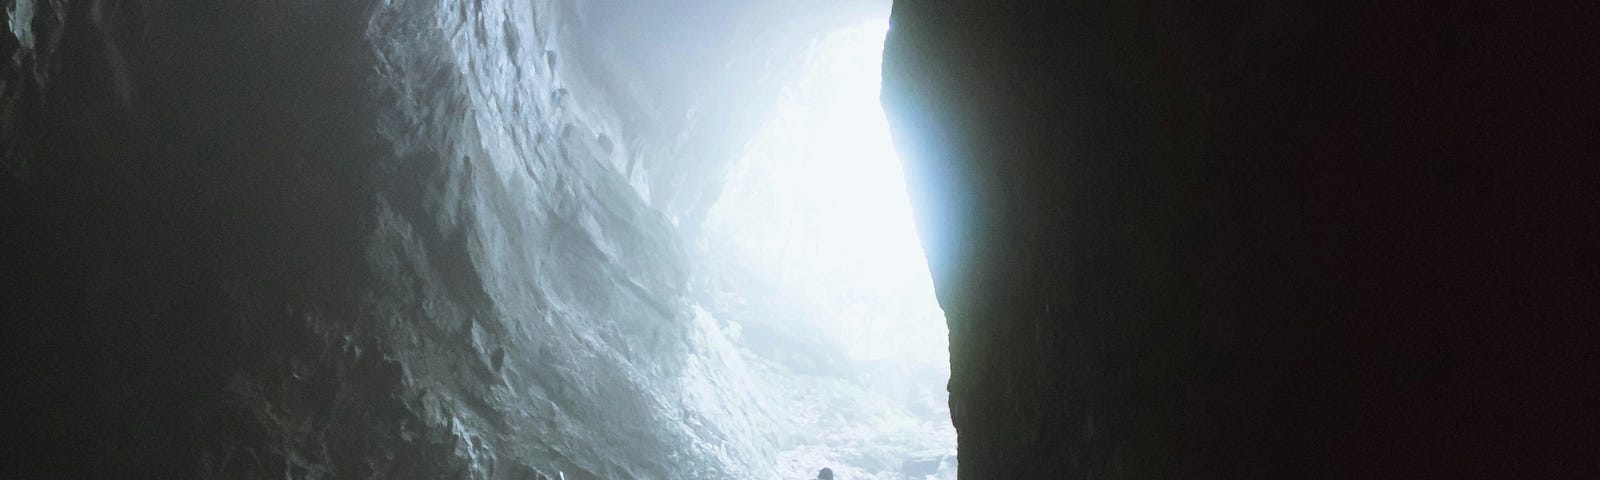 Massive cave with a person scrambling over rocks